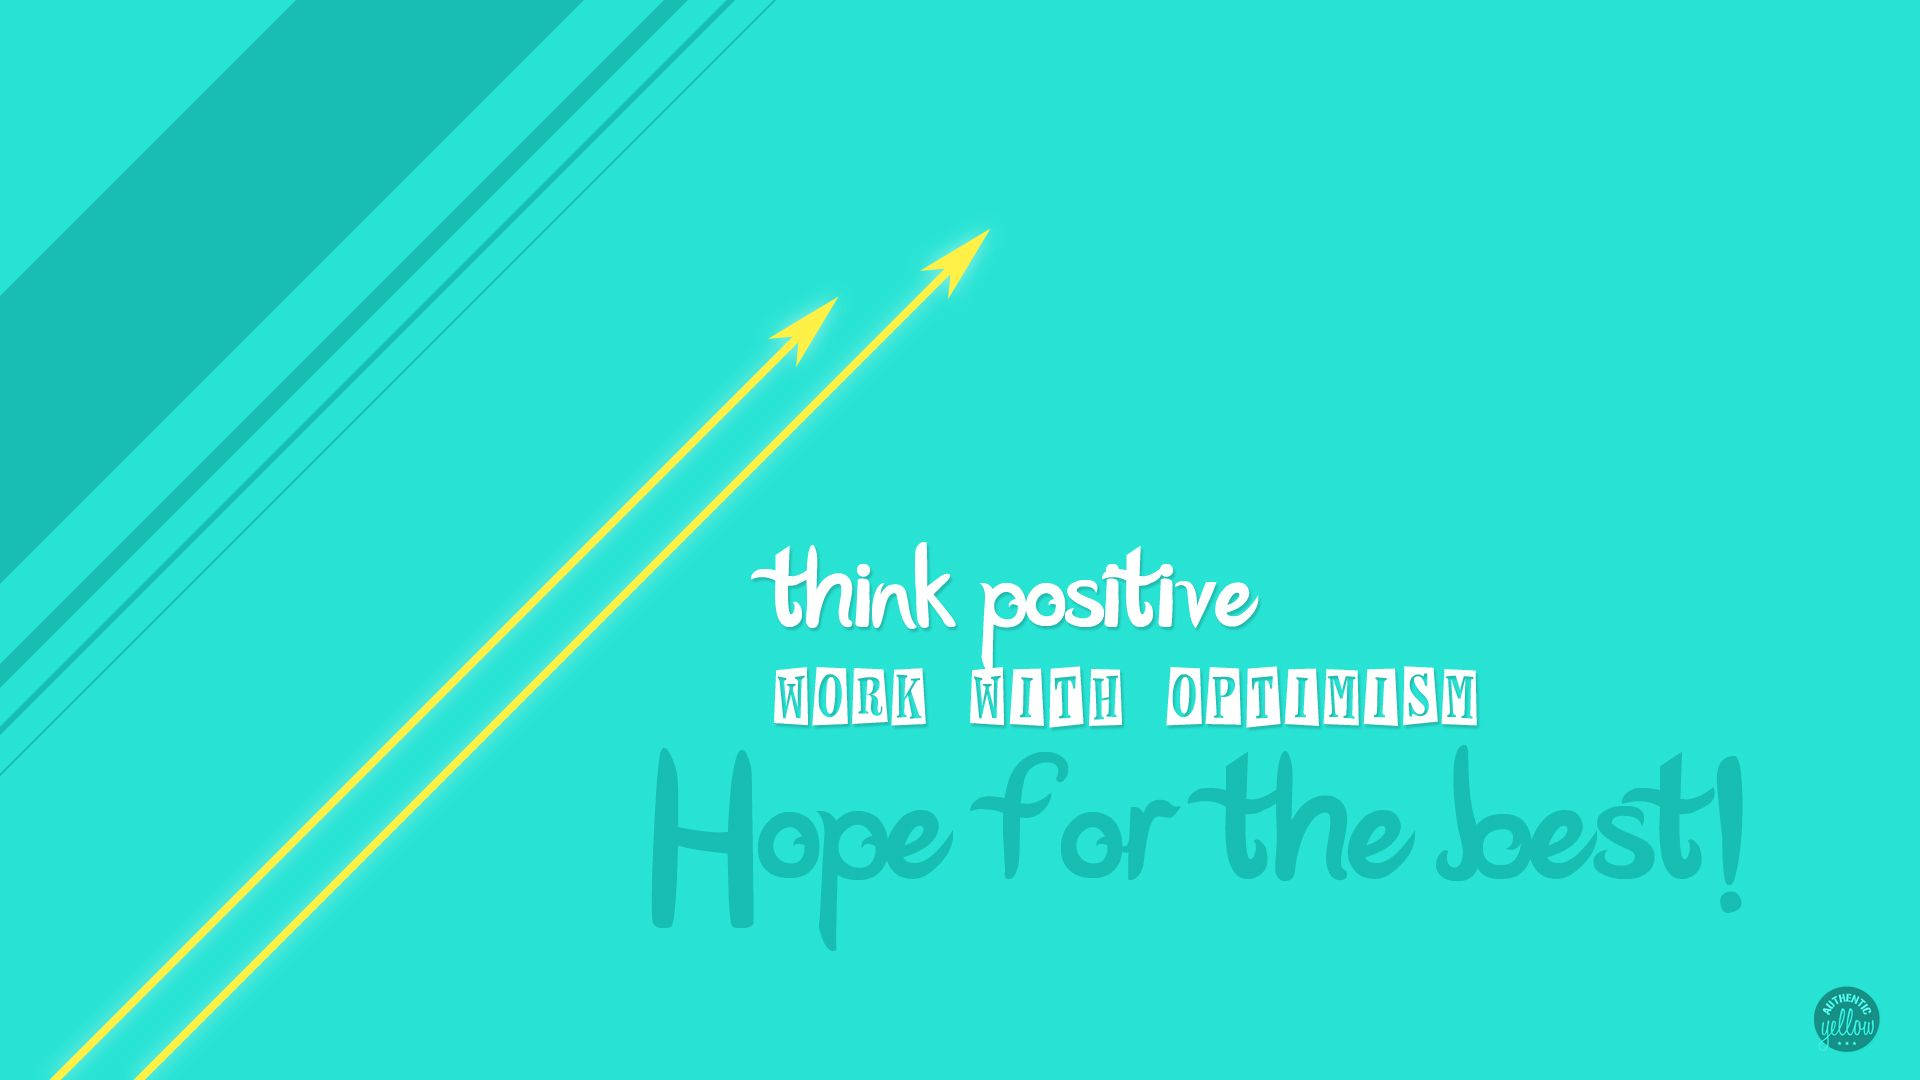 Download Optimistic Positive Thoughts Wallpaper 